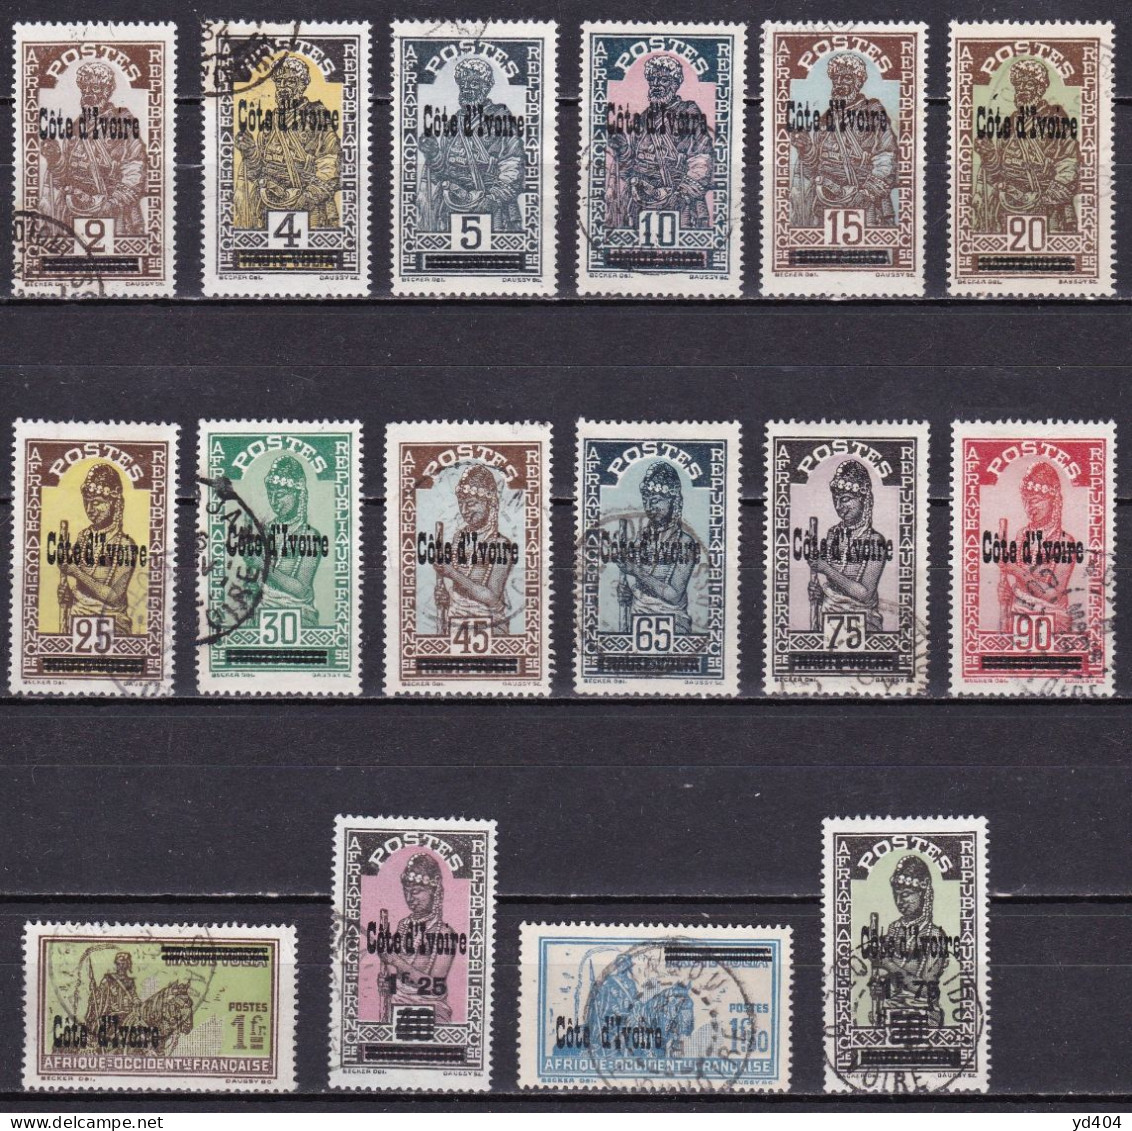 CF-CI-06 – FRENCH COLONIES – IVORY COAST – 1933 – UPPER VOLTA ST. OVERPR. – SG # 98/113 USED 93 € - Oblitérés